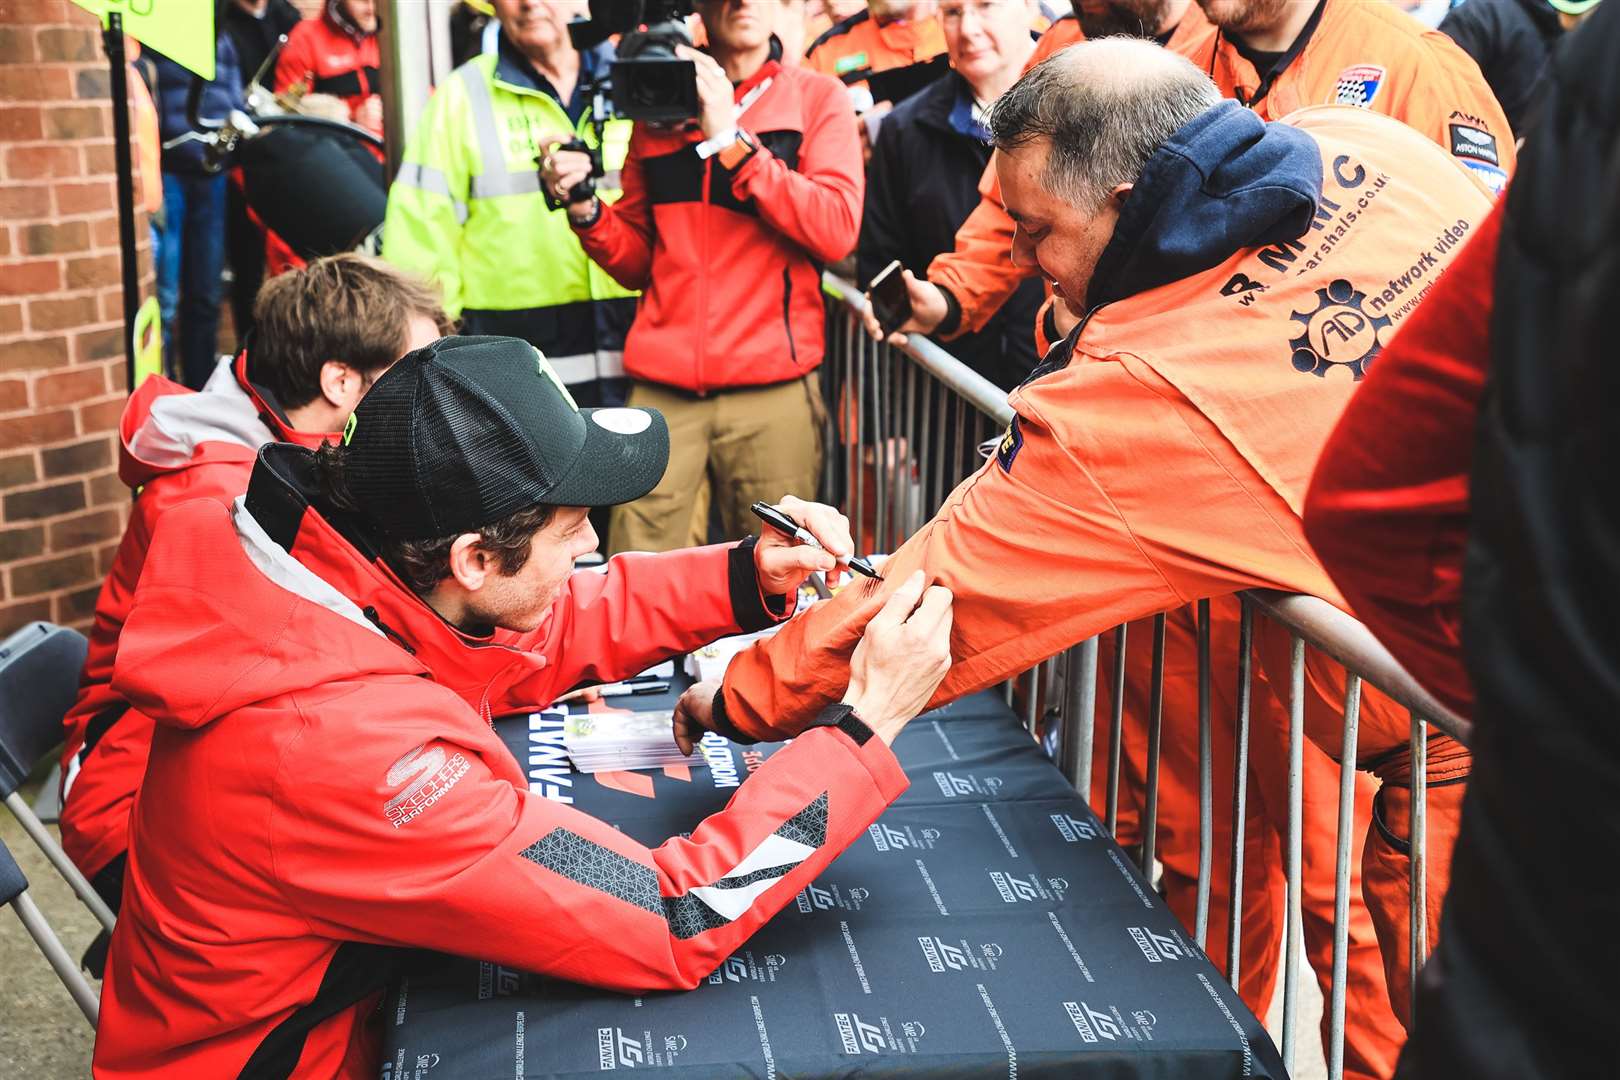 Marshals and spectators met the MotoGP legend during Sunday's pitlane walkabout